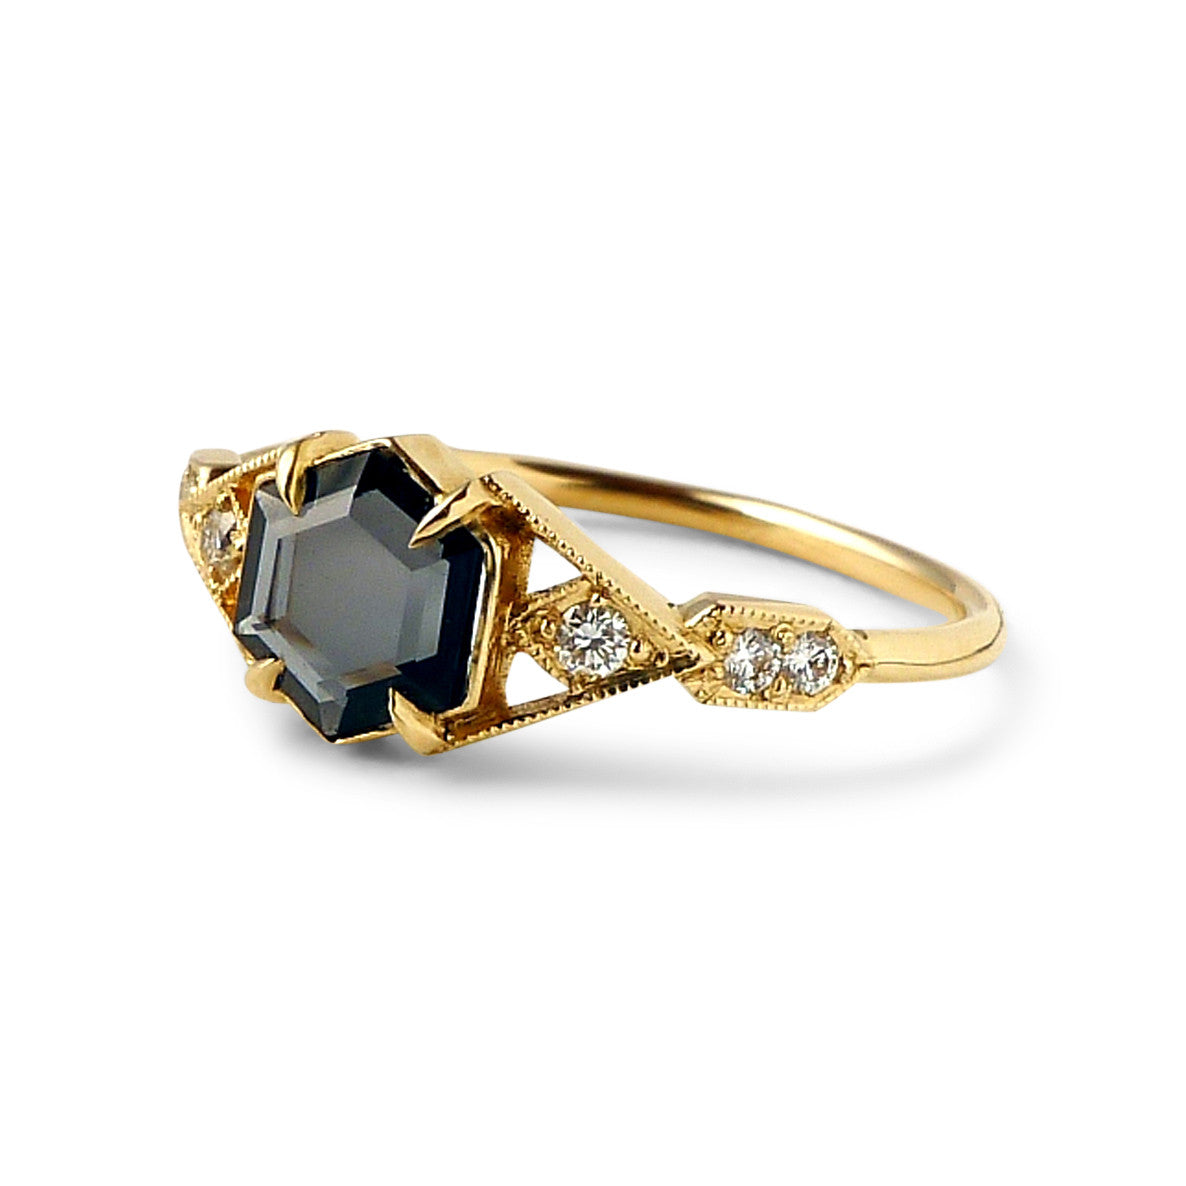 Casia Vestra Ring with Portrait Cut Spinel